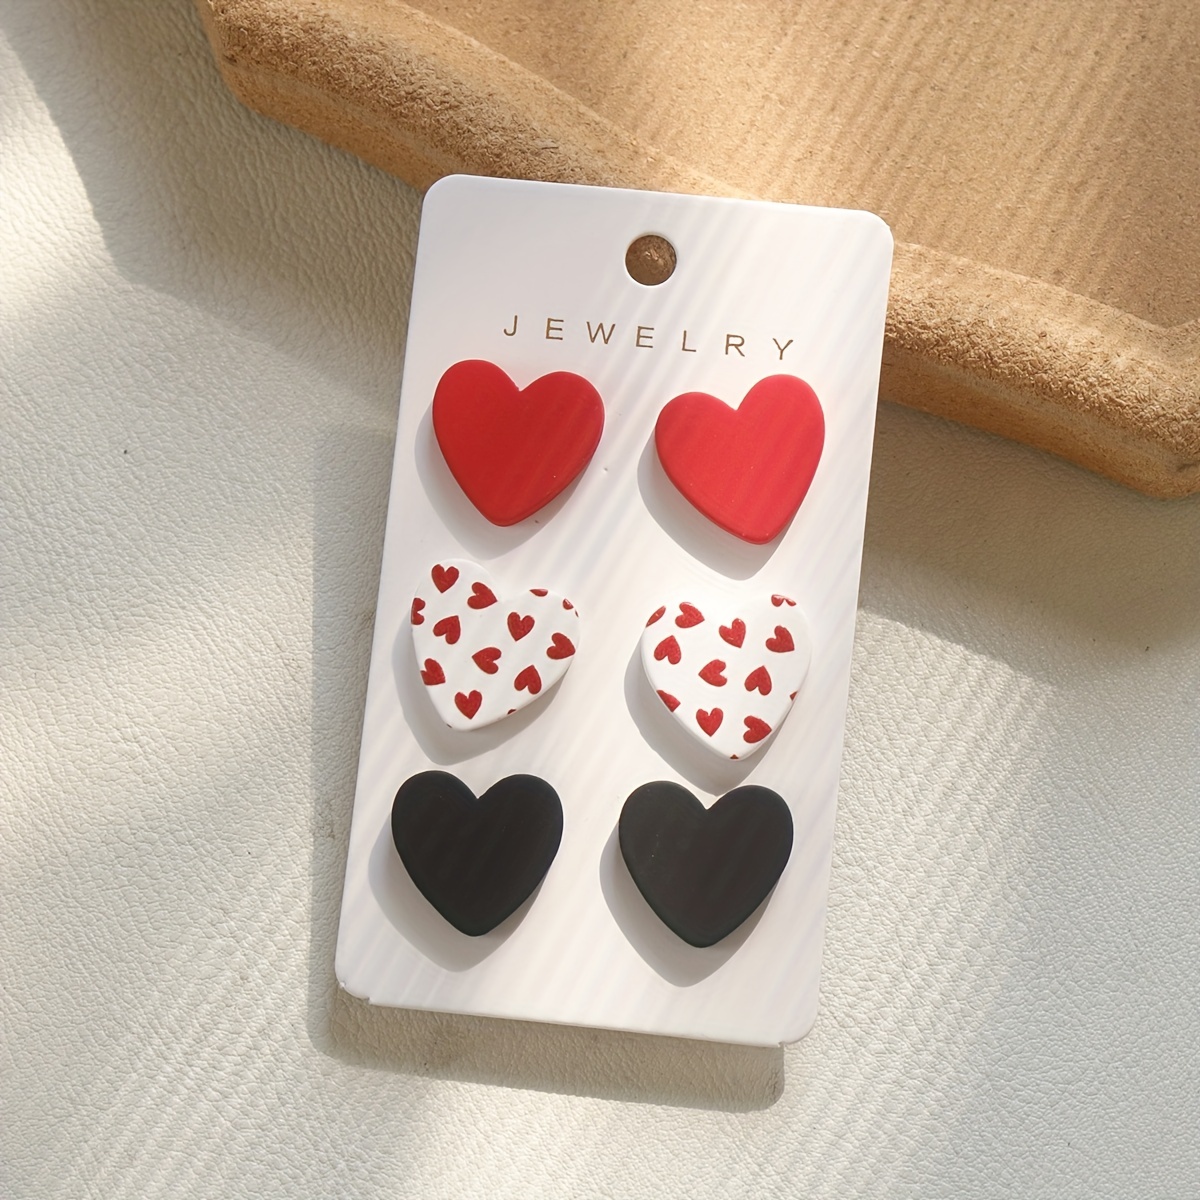 

3 Pairs Set Of Tiny Delicate Heart Design Stud Earrings Acrylic Lightweight Female Earrings For Valentines Day Gift